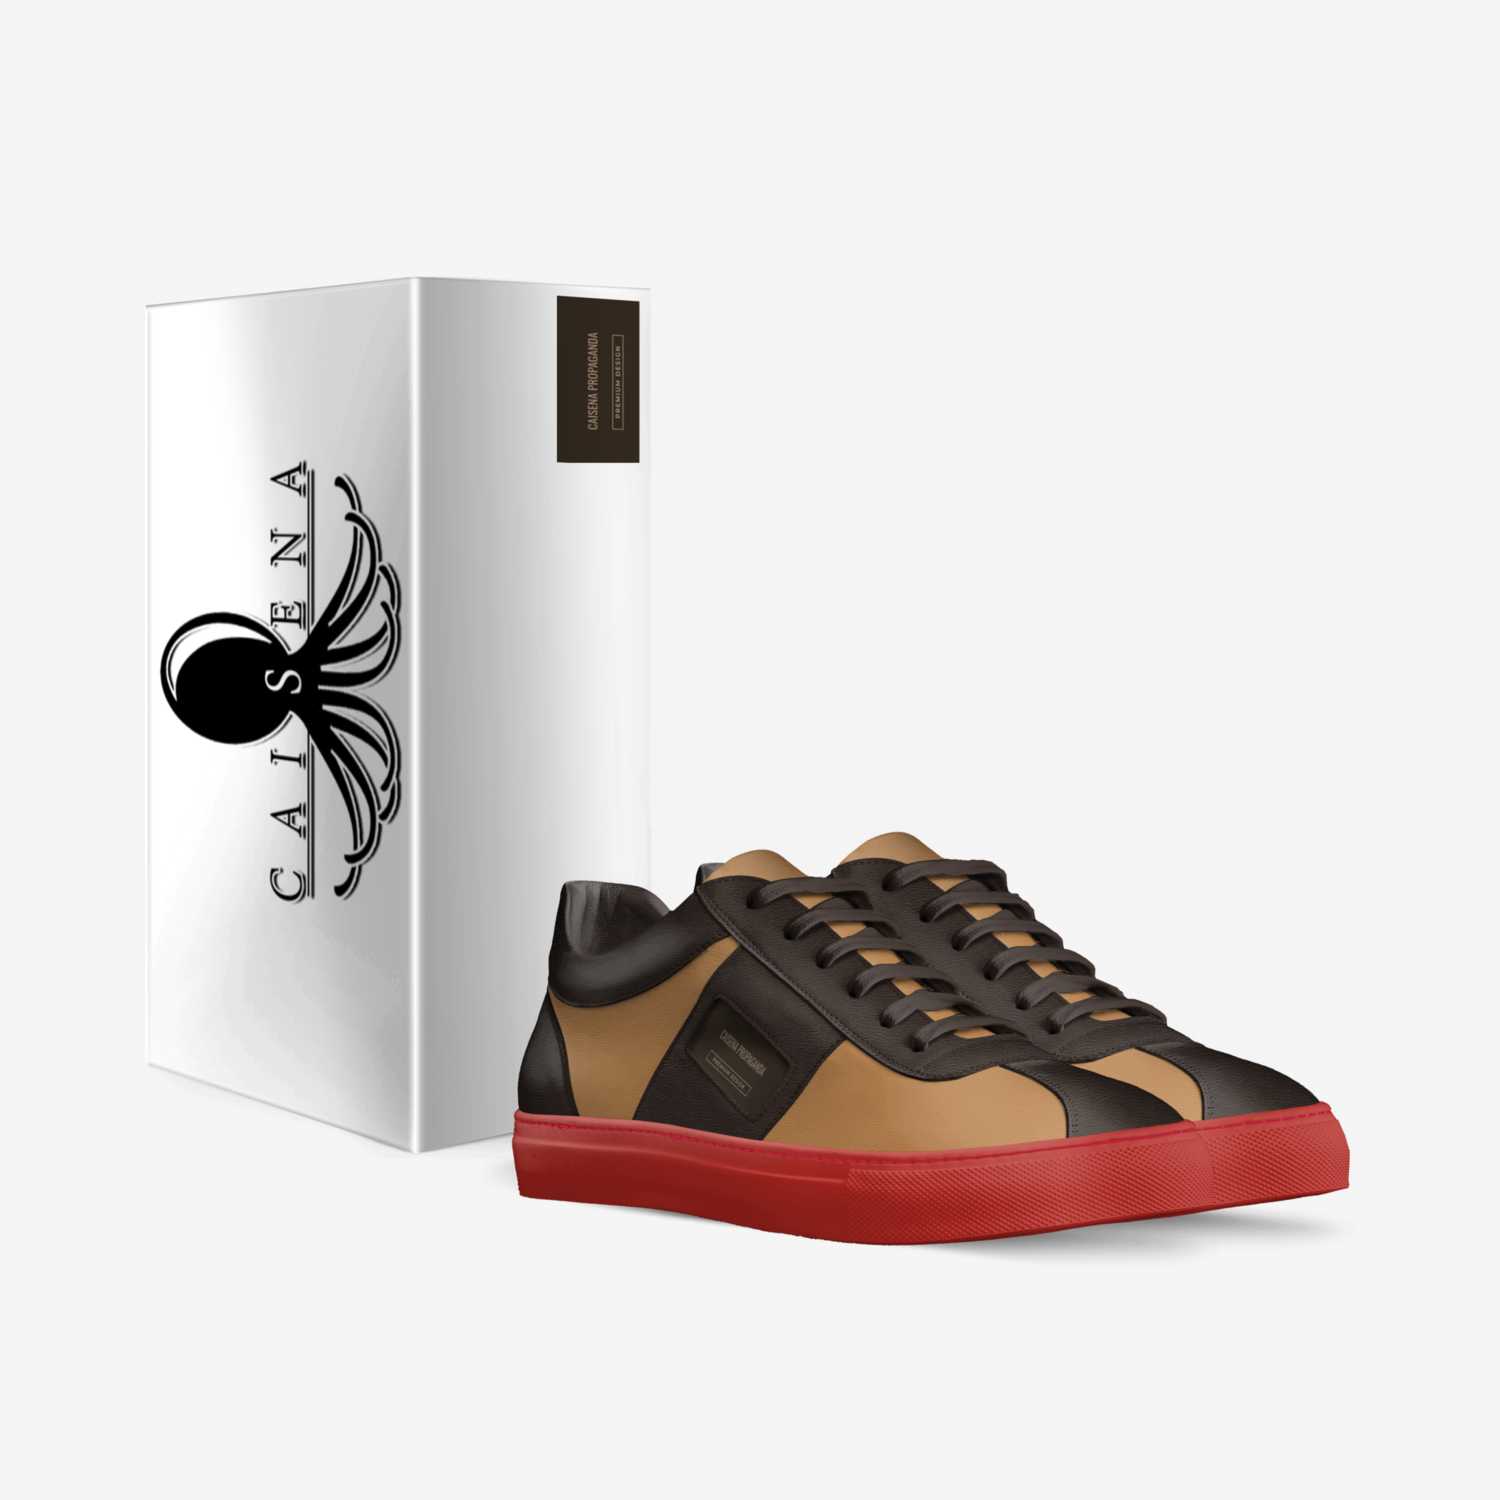 Caisena Propaganda custom made in Italy shoes by Daniel Trice | Box view